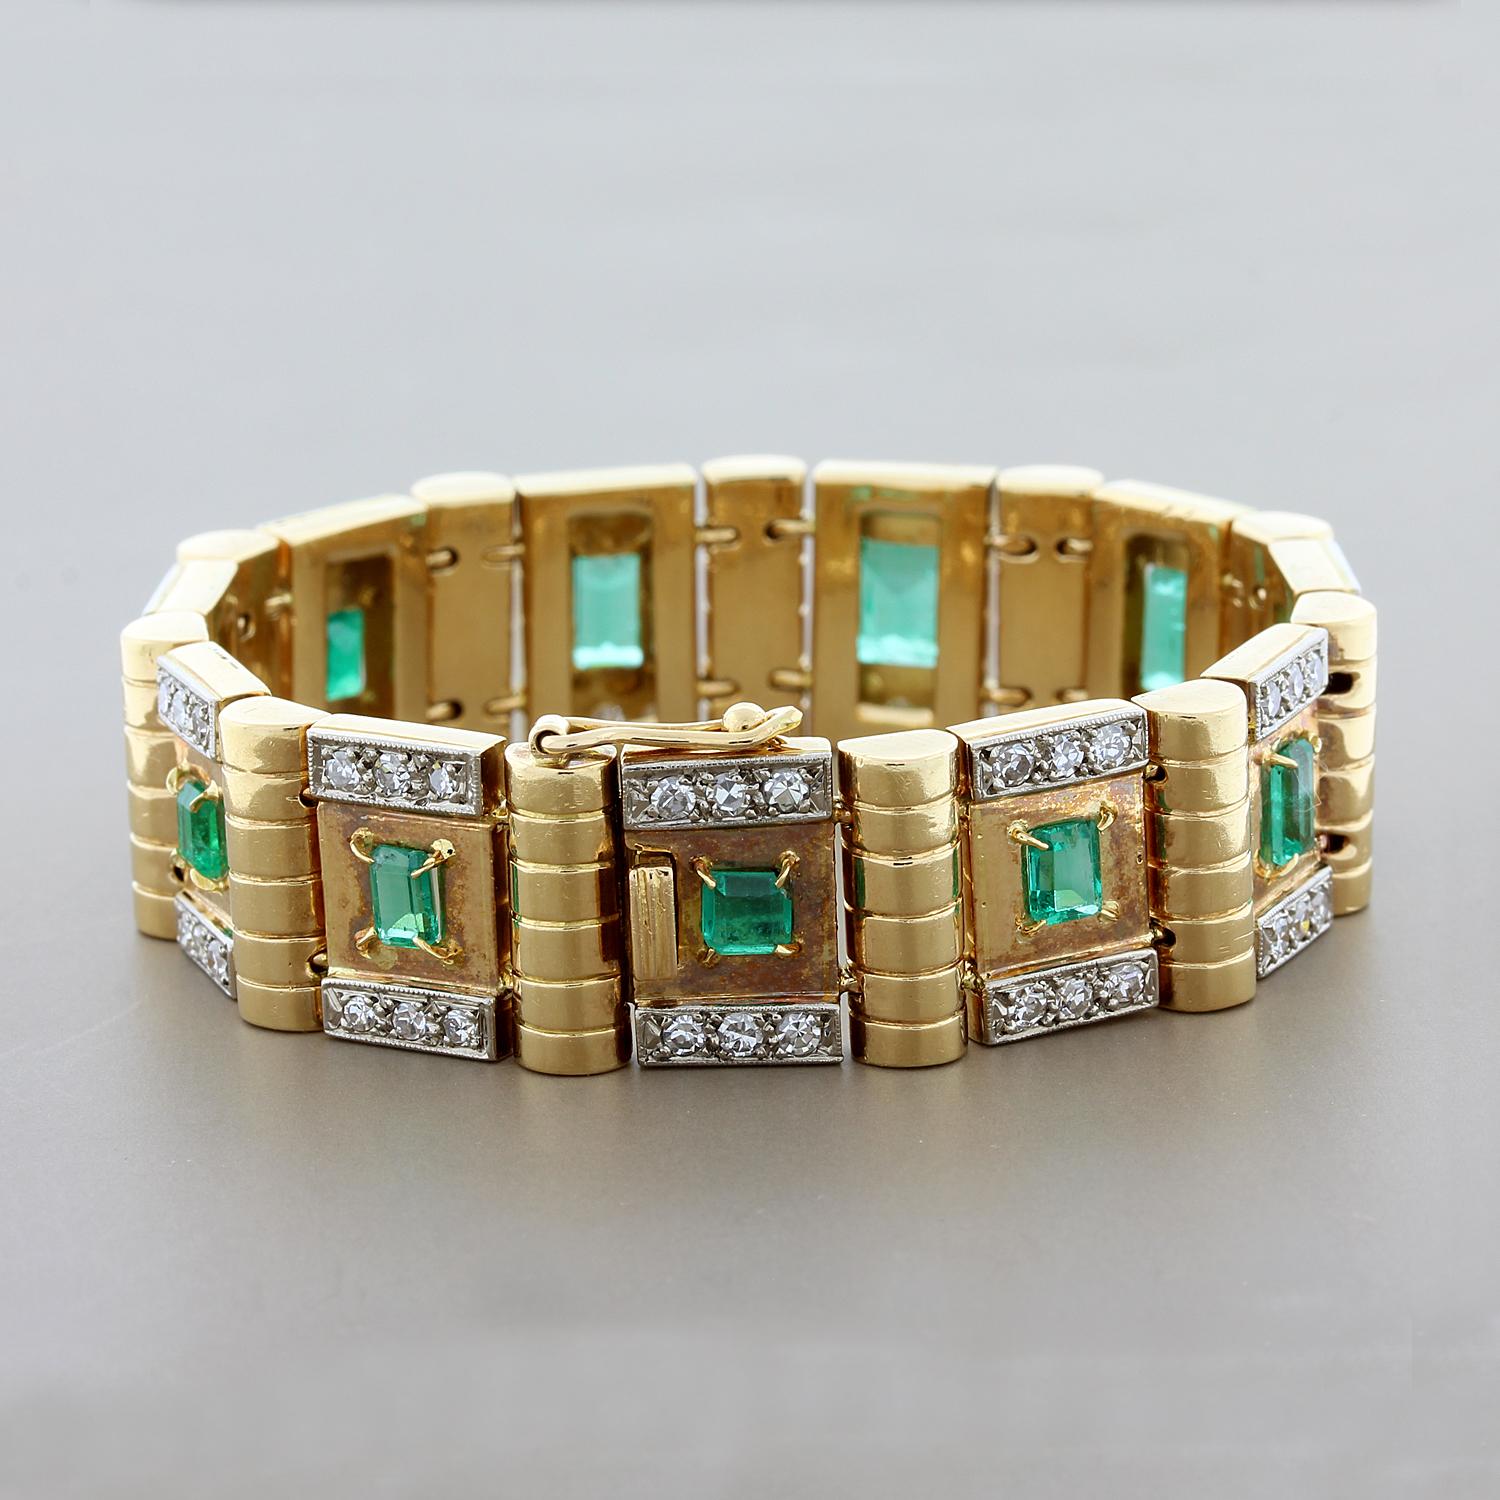 This stunning Cleopatra style estate bracelet features 5.50 carats of emeralds that go all the way around the bracelet. There are a total 0f 2.70 carats of round brilliant cut diamonds set across this lovely 18K gold bracelet.

Bracelet Length: 6.65